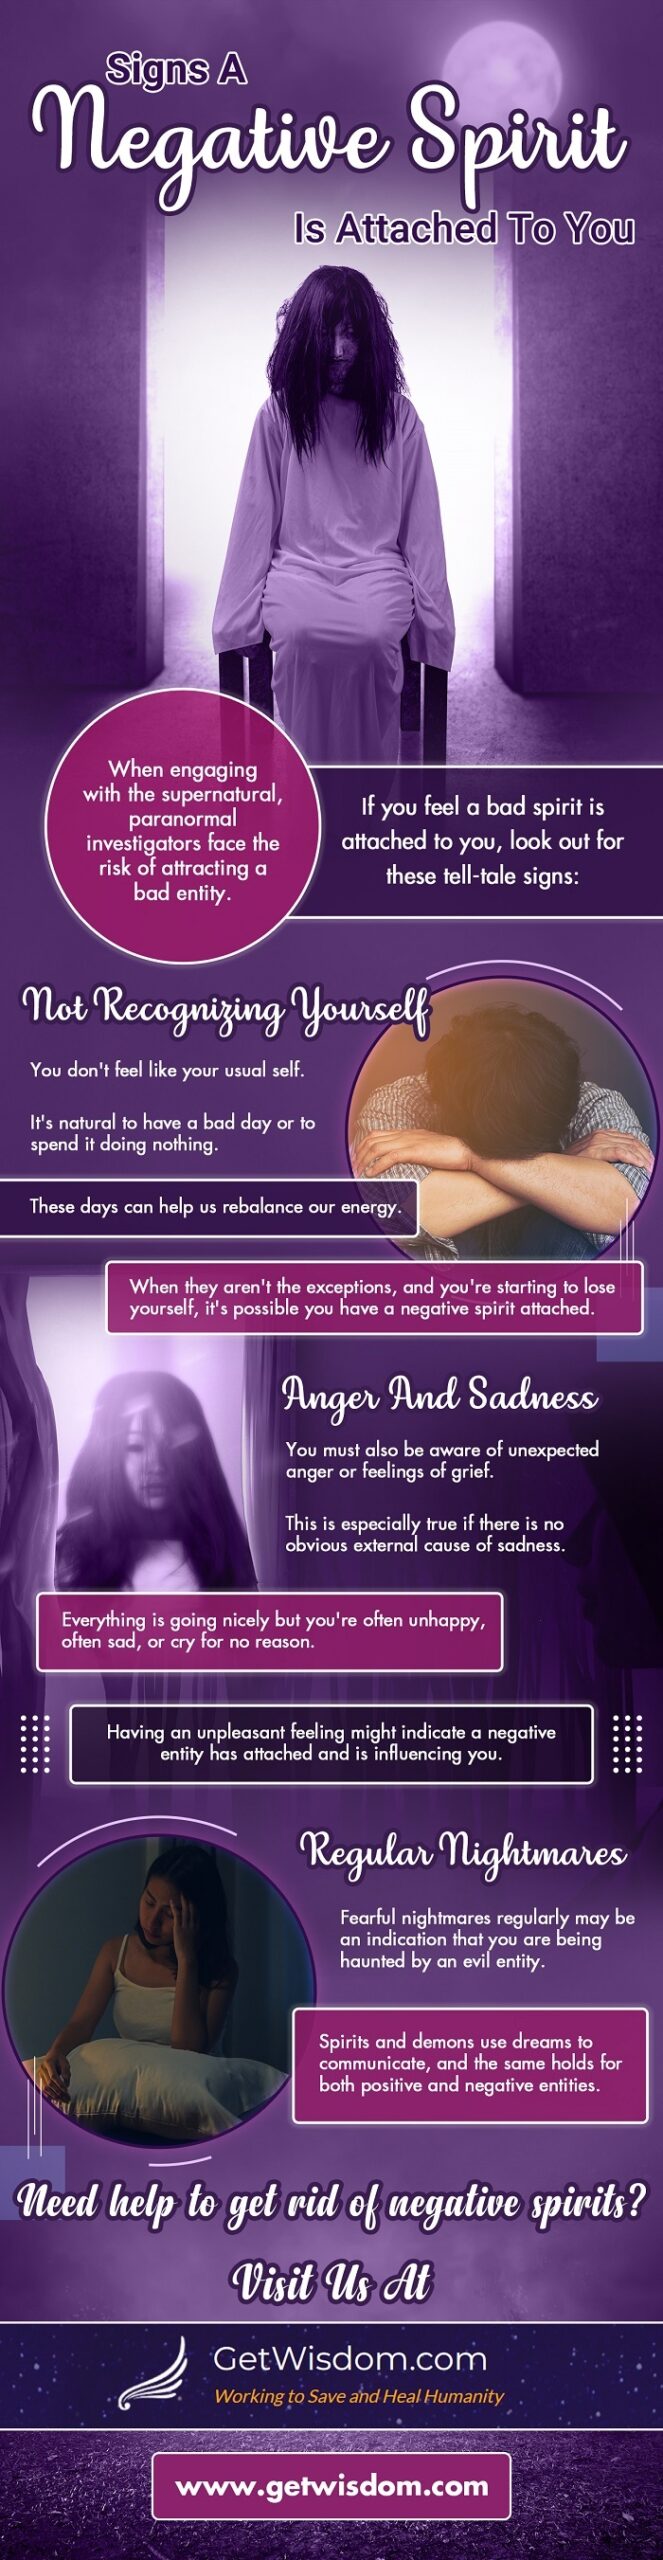 Signs a Negative Spirit is Attached to You - An Infographic